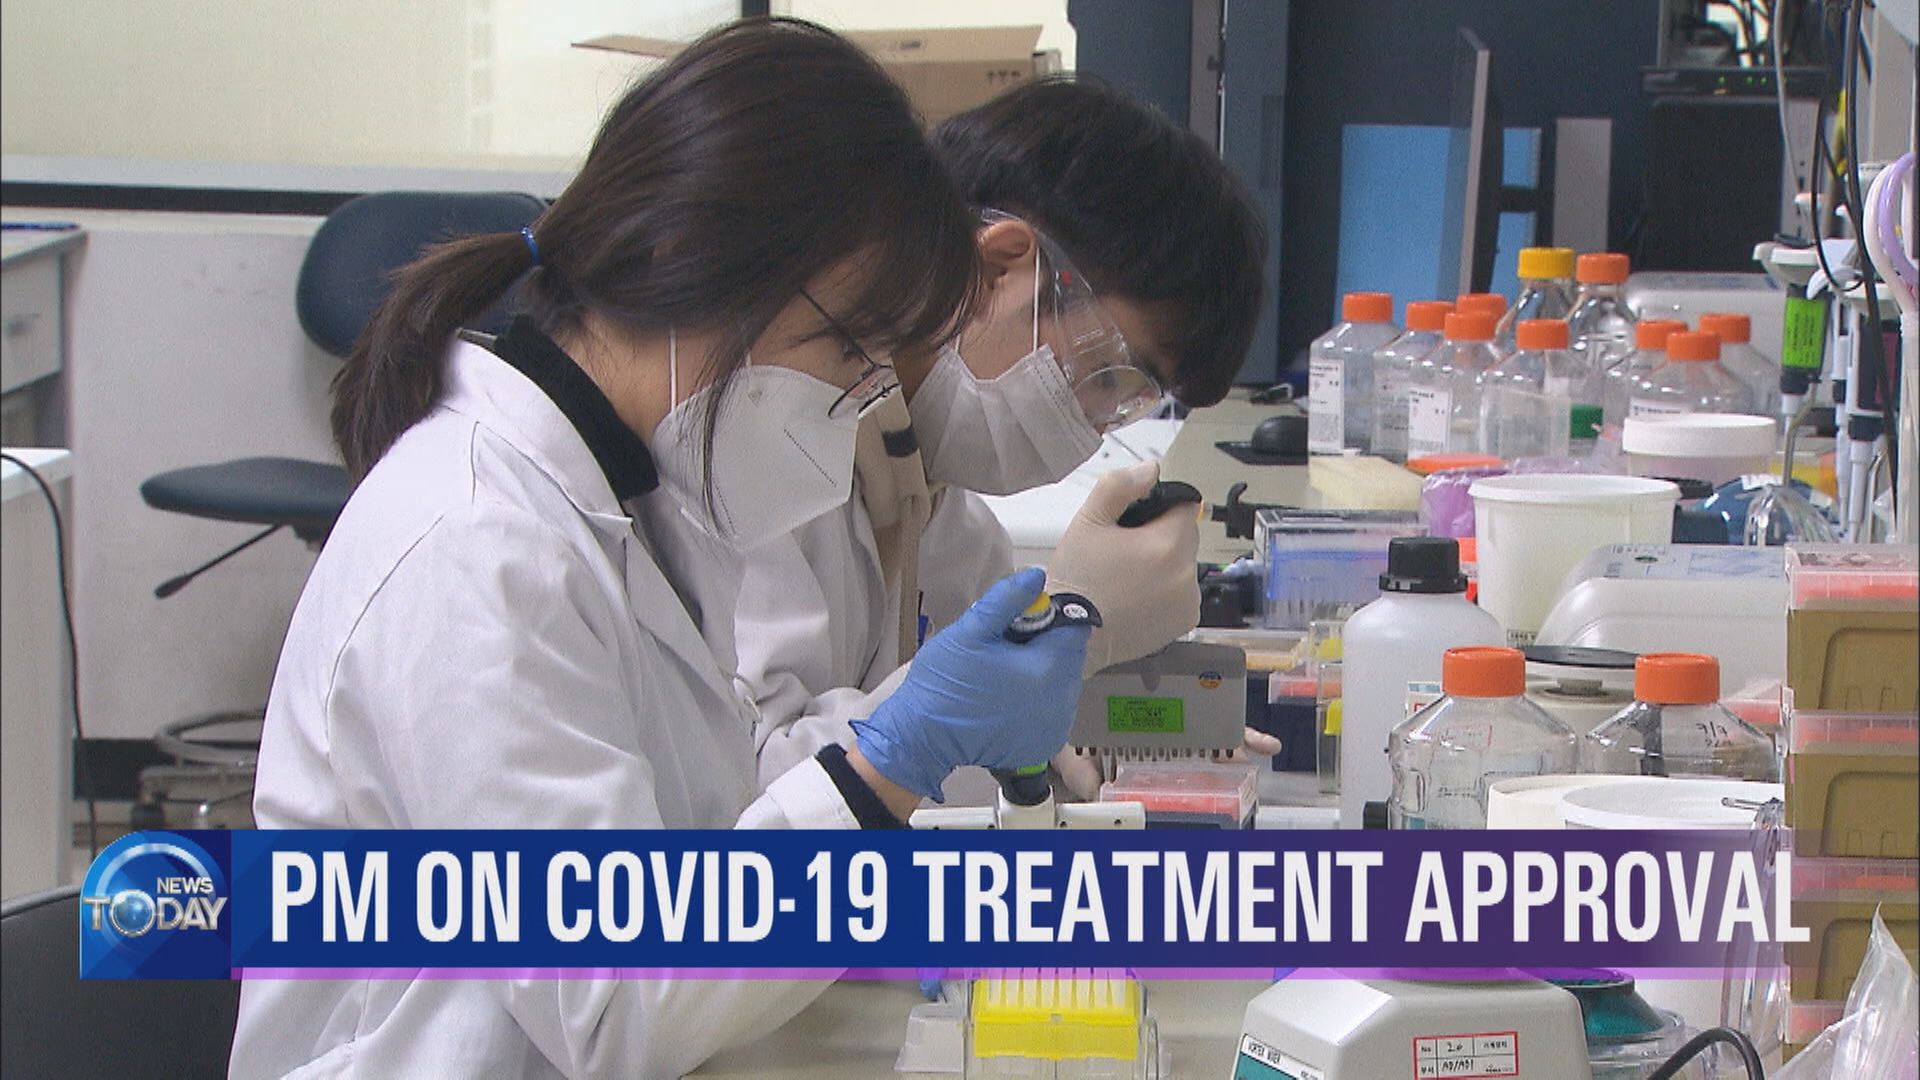 PM ON COVID-19 TREATMENT APPROVAL